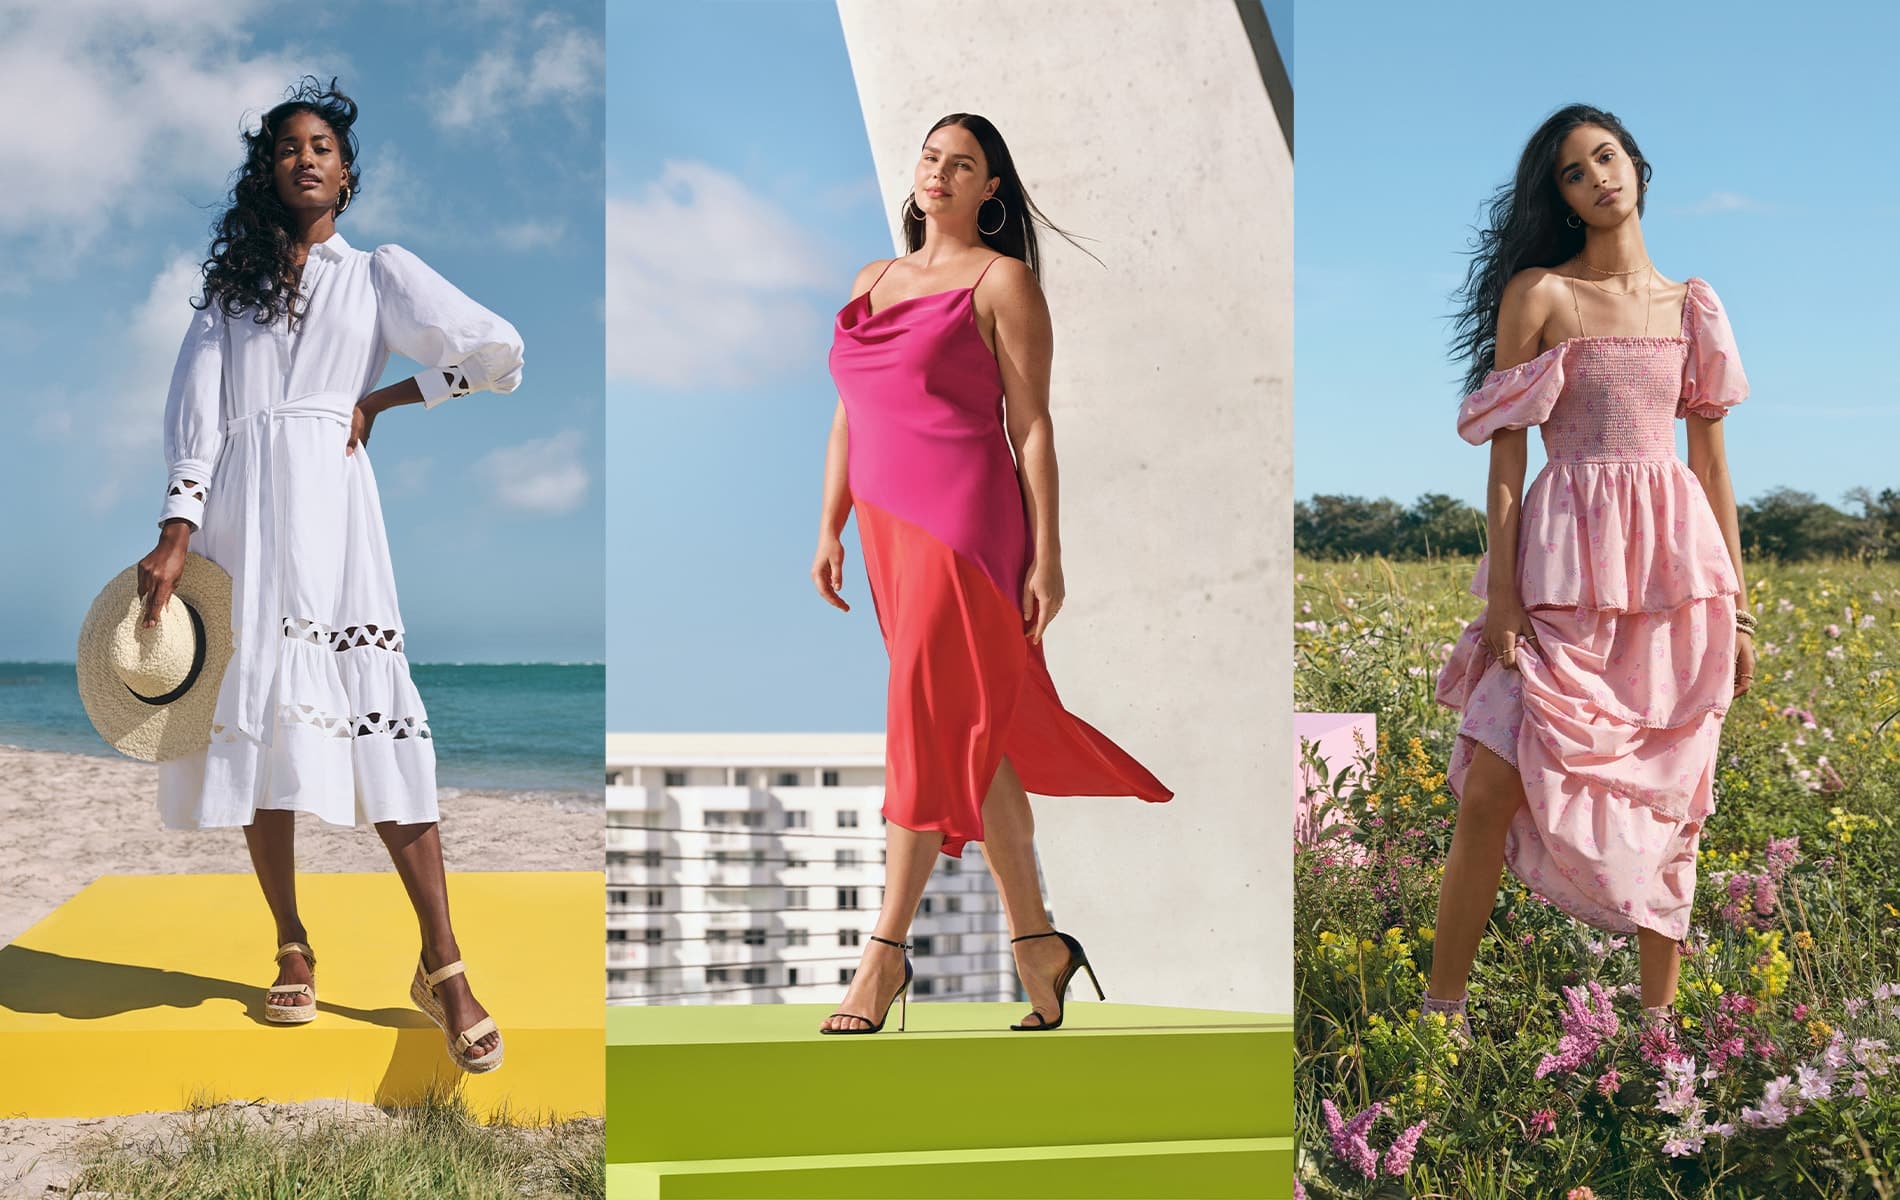 The New Target Designer Dress Collection Is a Summertime Dream!